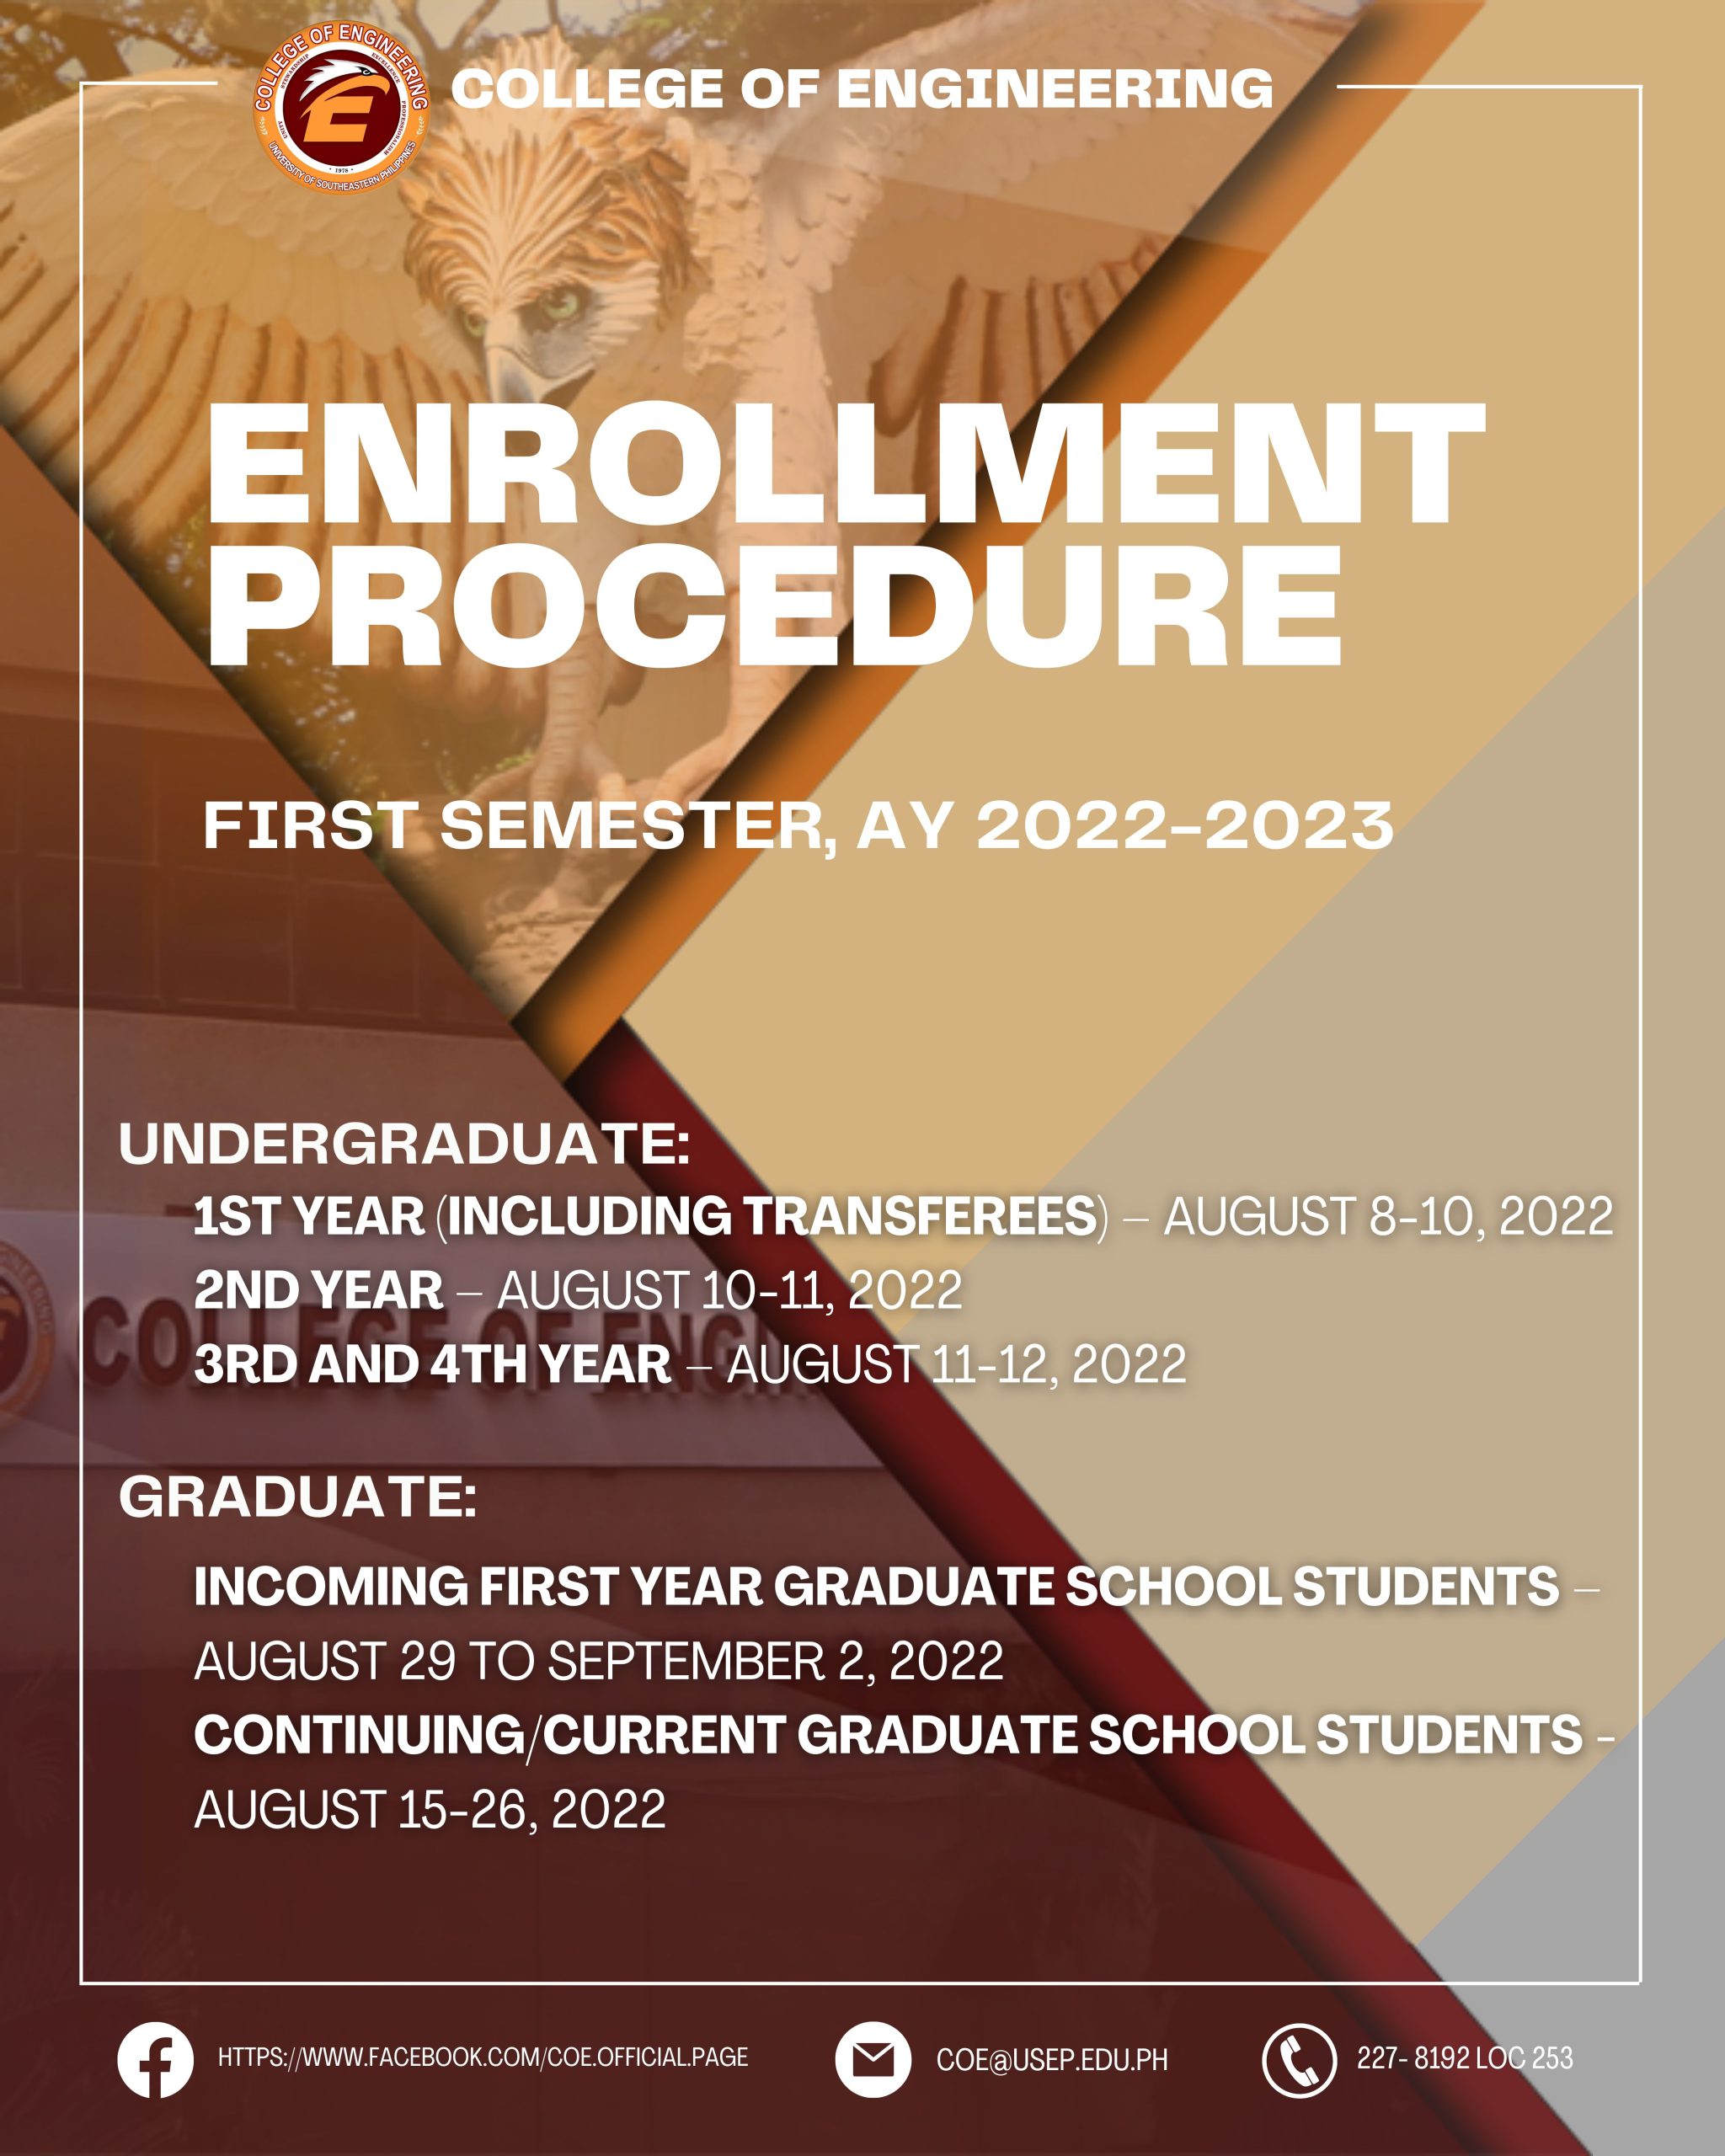 ENROLLMENT PROCEDURE FOR THE FIRST SEMESTER OF AY 2022-2023